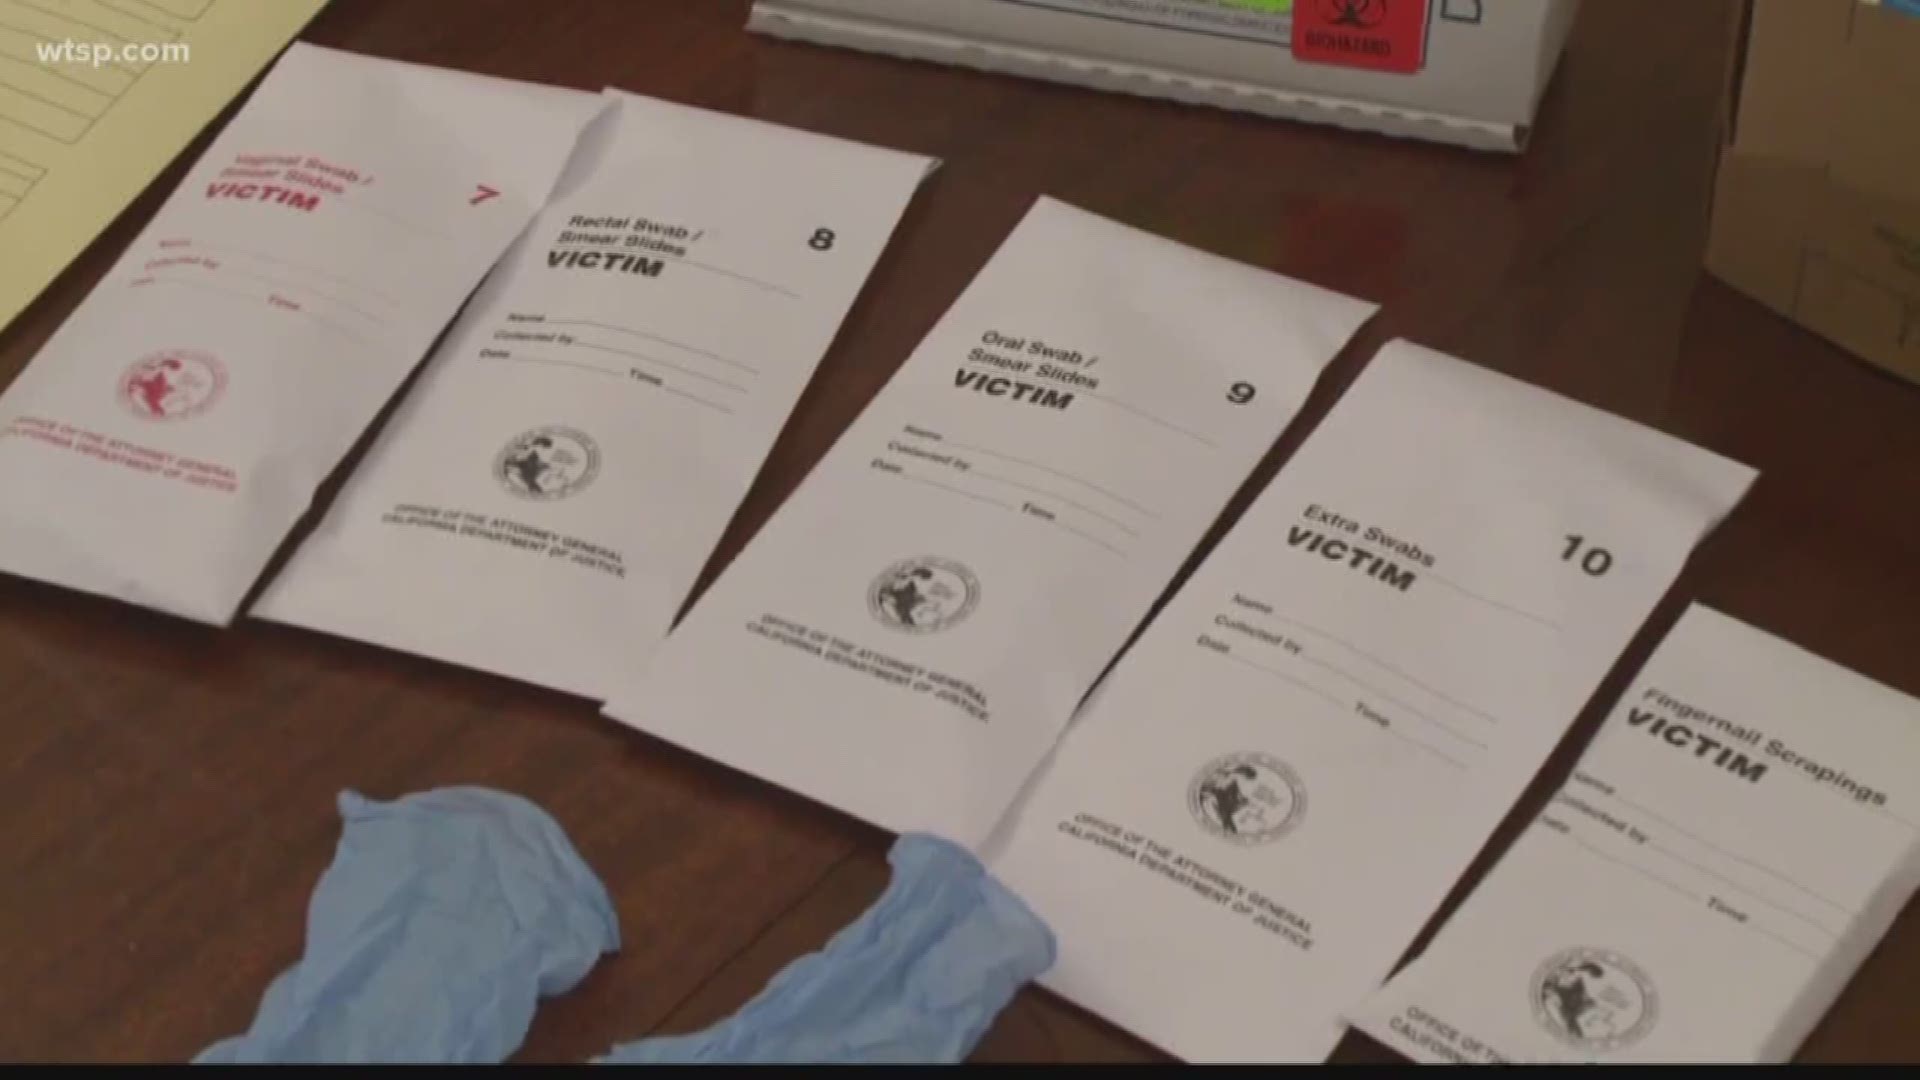 The Florida Department of Law Enforcement says it has cleared a backlog of nearly 13,000 untested rape kits.

In July 2015, 10Investigates exposed evidence collected from sexual assault victims had gone unprocessed for months, sometimes years. FDLE told us in February they anticipated fully processing those kits by June 30th.

Jeremy Burns, the communications coordinator for FDLE, says “for all intents and purposes, the SAK Backlog is complete.”

He says there are a few kits, submitted by law enforcement agencies in late June, that are being processed.

FDLE will now conduct a manual count of the completed kits and will have those numbers in late July. We also hope to learn how many of these now processed kits have led to new leads in unsolved crimes.